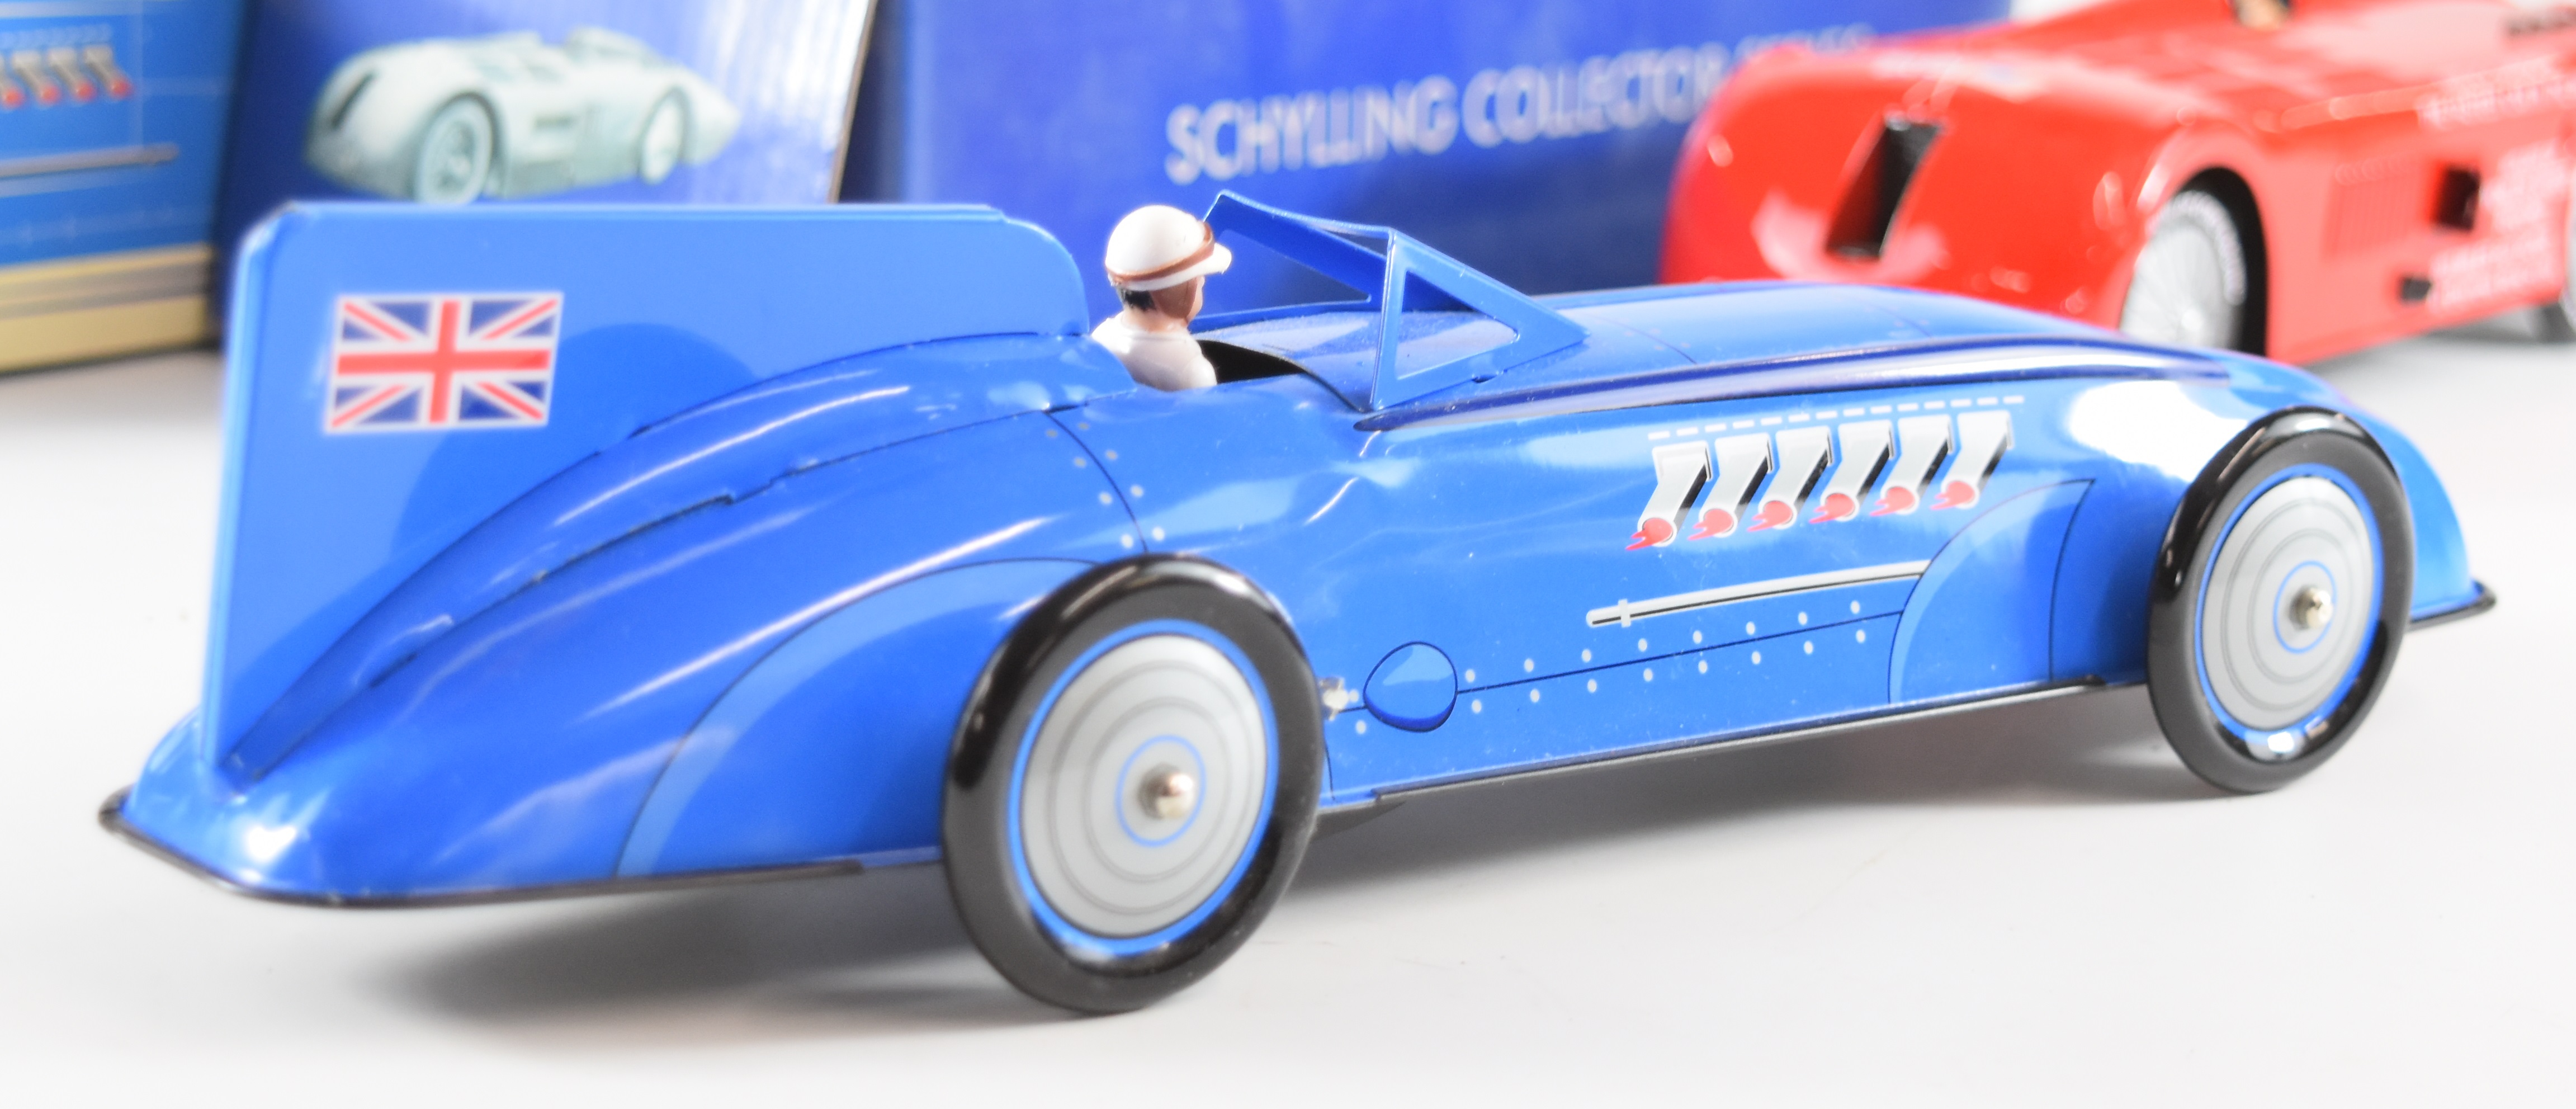 Two Schylling Collector Series tinplate land speed record cars comprising Sir Ian's Bluebird and The - Image 7 of 7